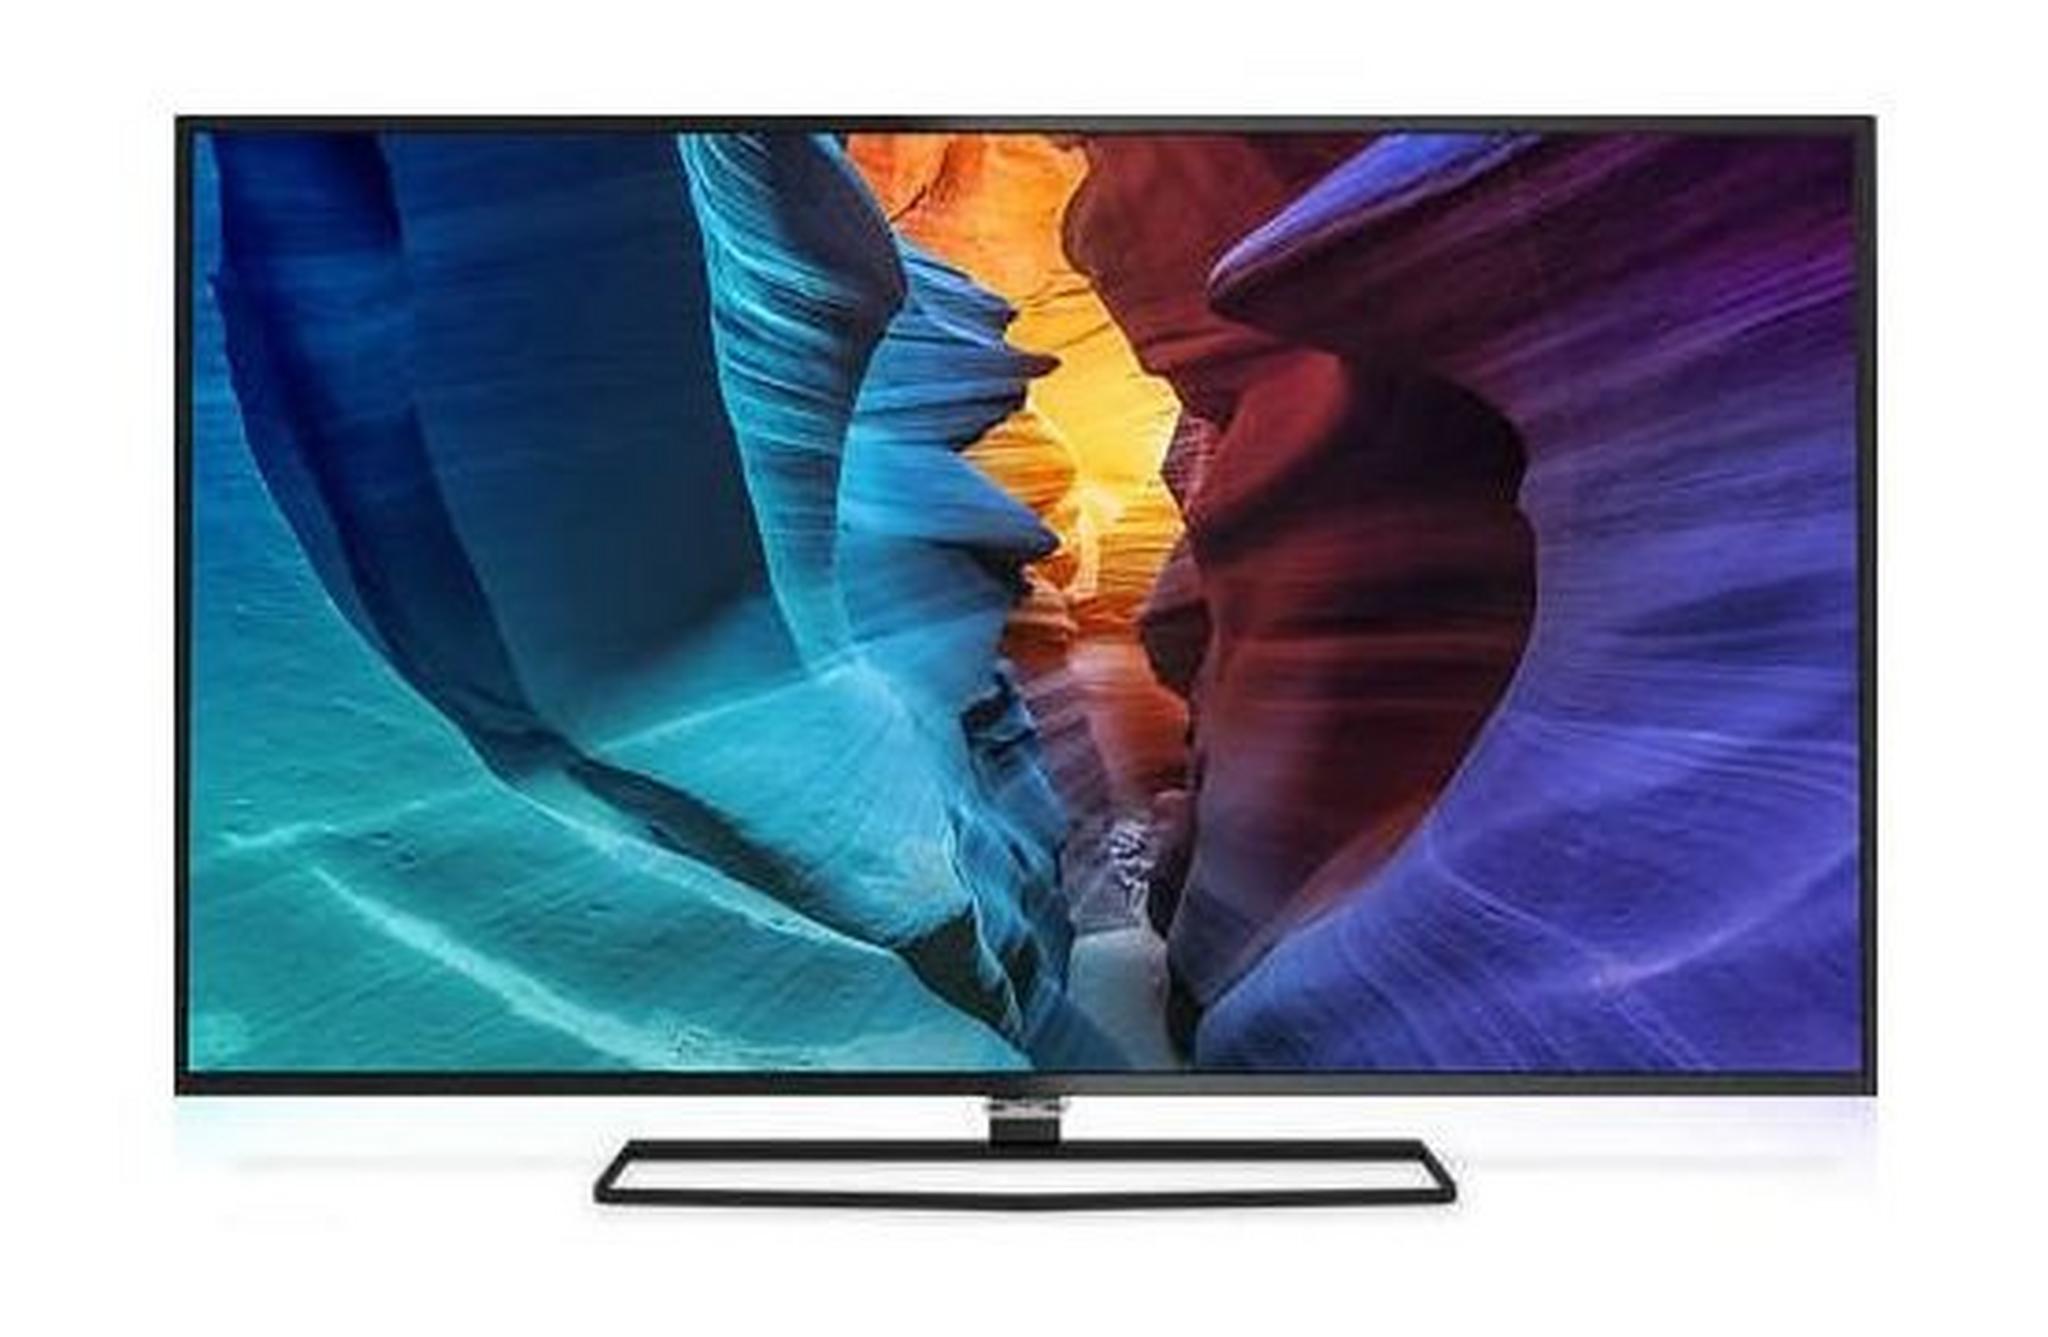 Philips 55-inch 4K Ultra HD Slim LED TV powered by Android - 55PUT6800/56